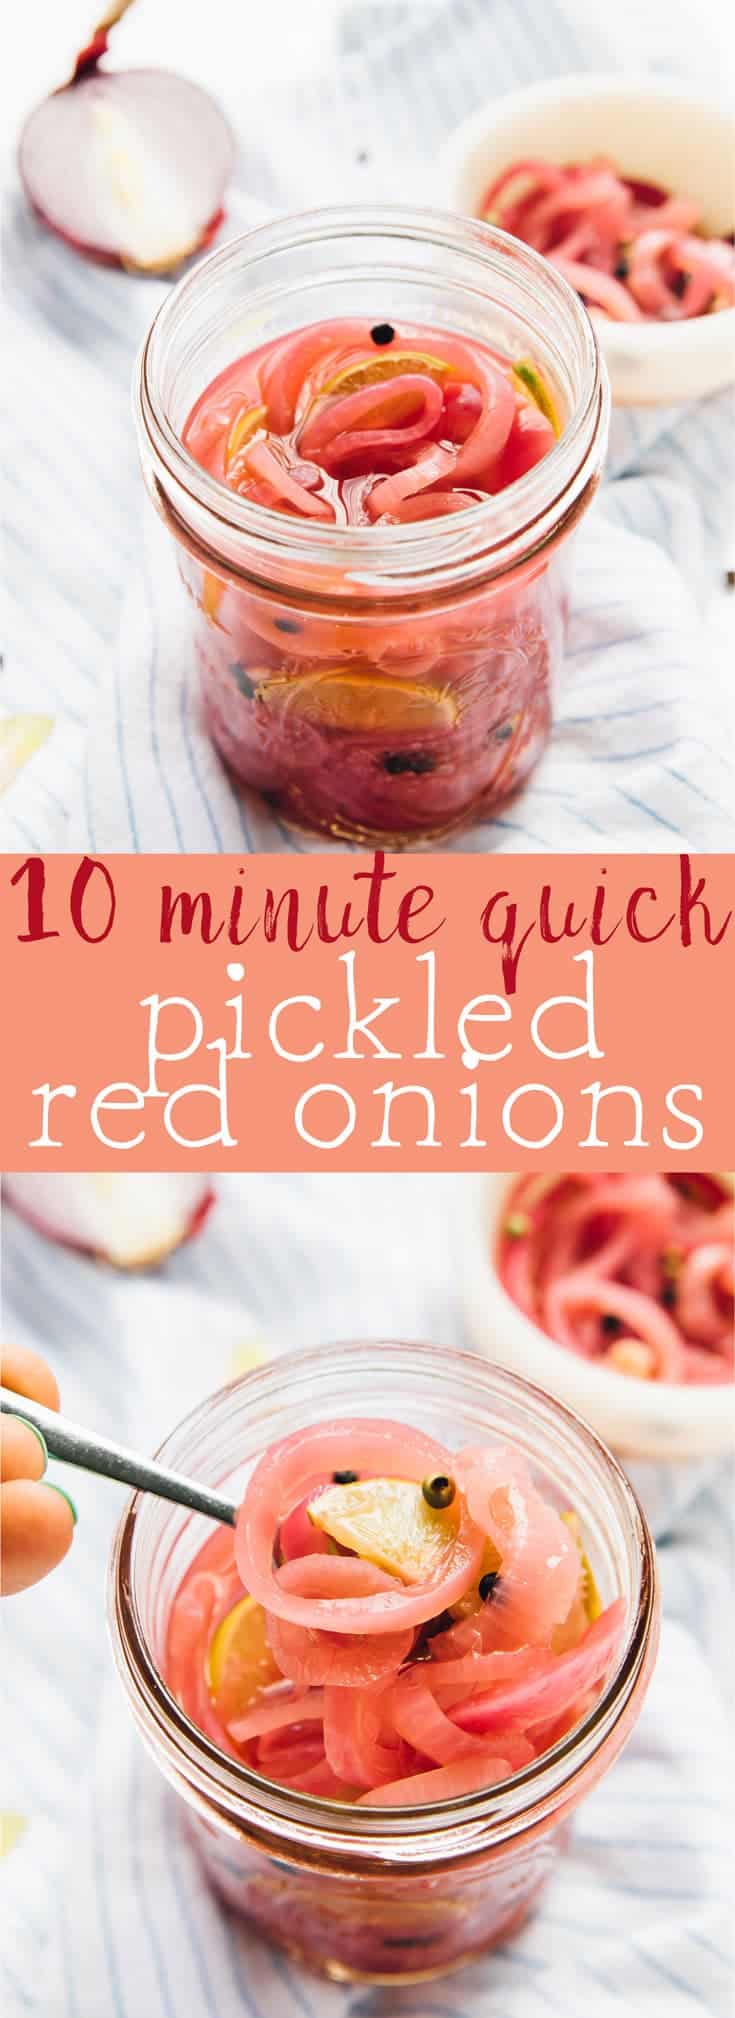 These Quick Pickled Onions recipe takes only 10 minutes! It completely transforms the onions, and adds a divine pop of flavour to any recipe. Use them in sandwiches, tacos, burgers and any recipe you like! via https://jessicainthekitchen.com